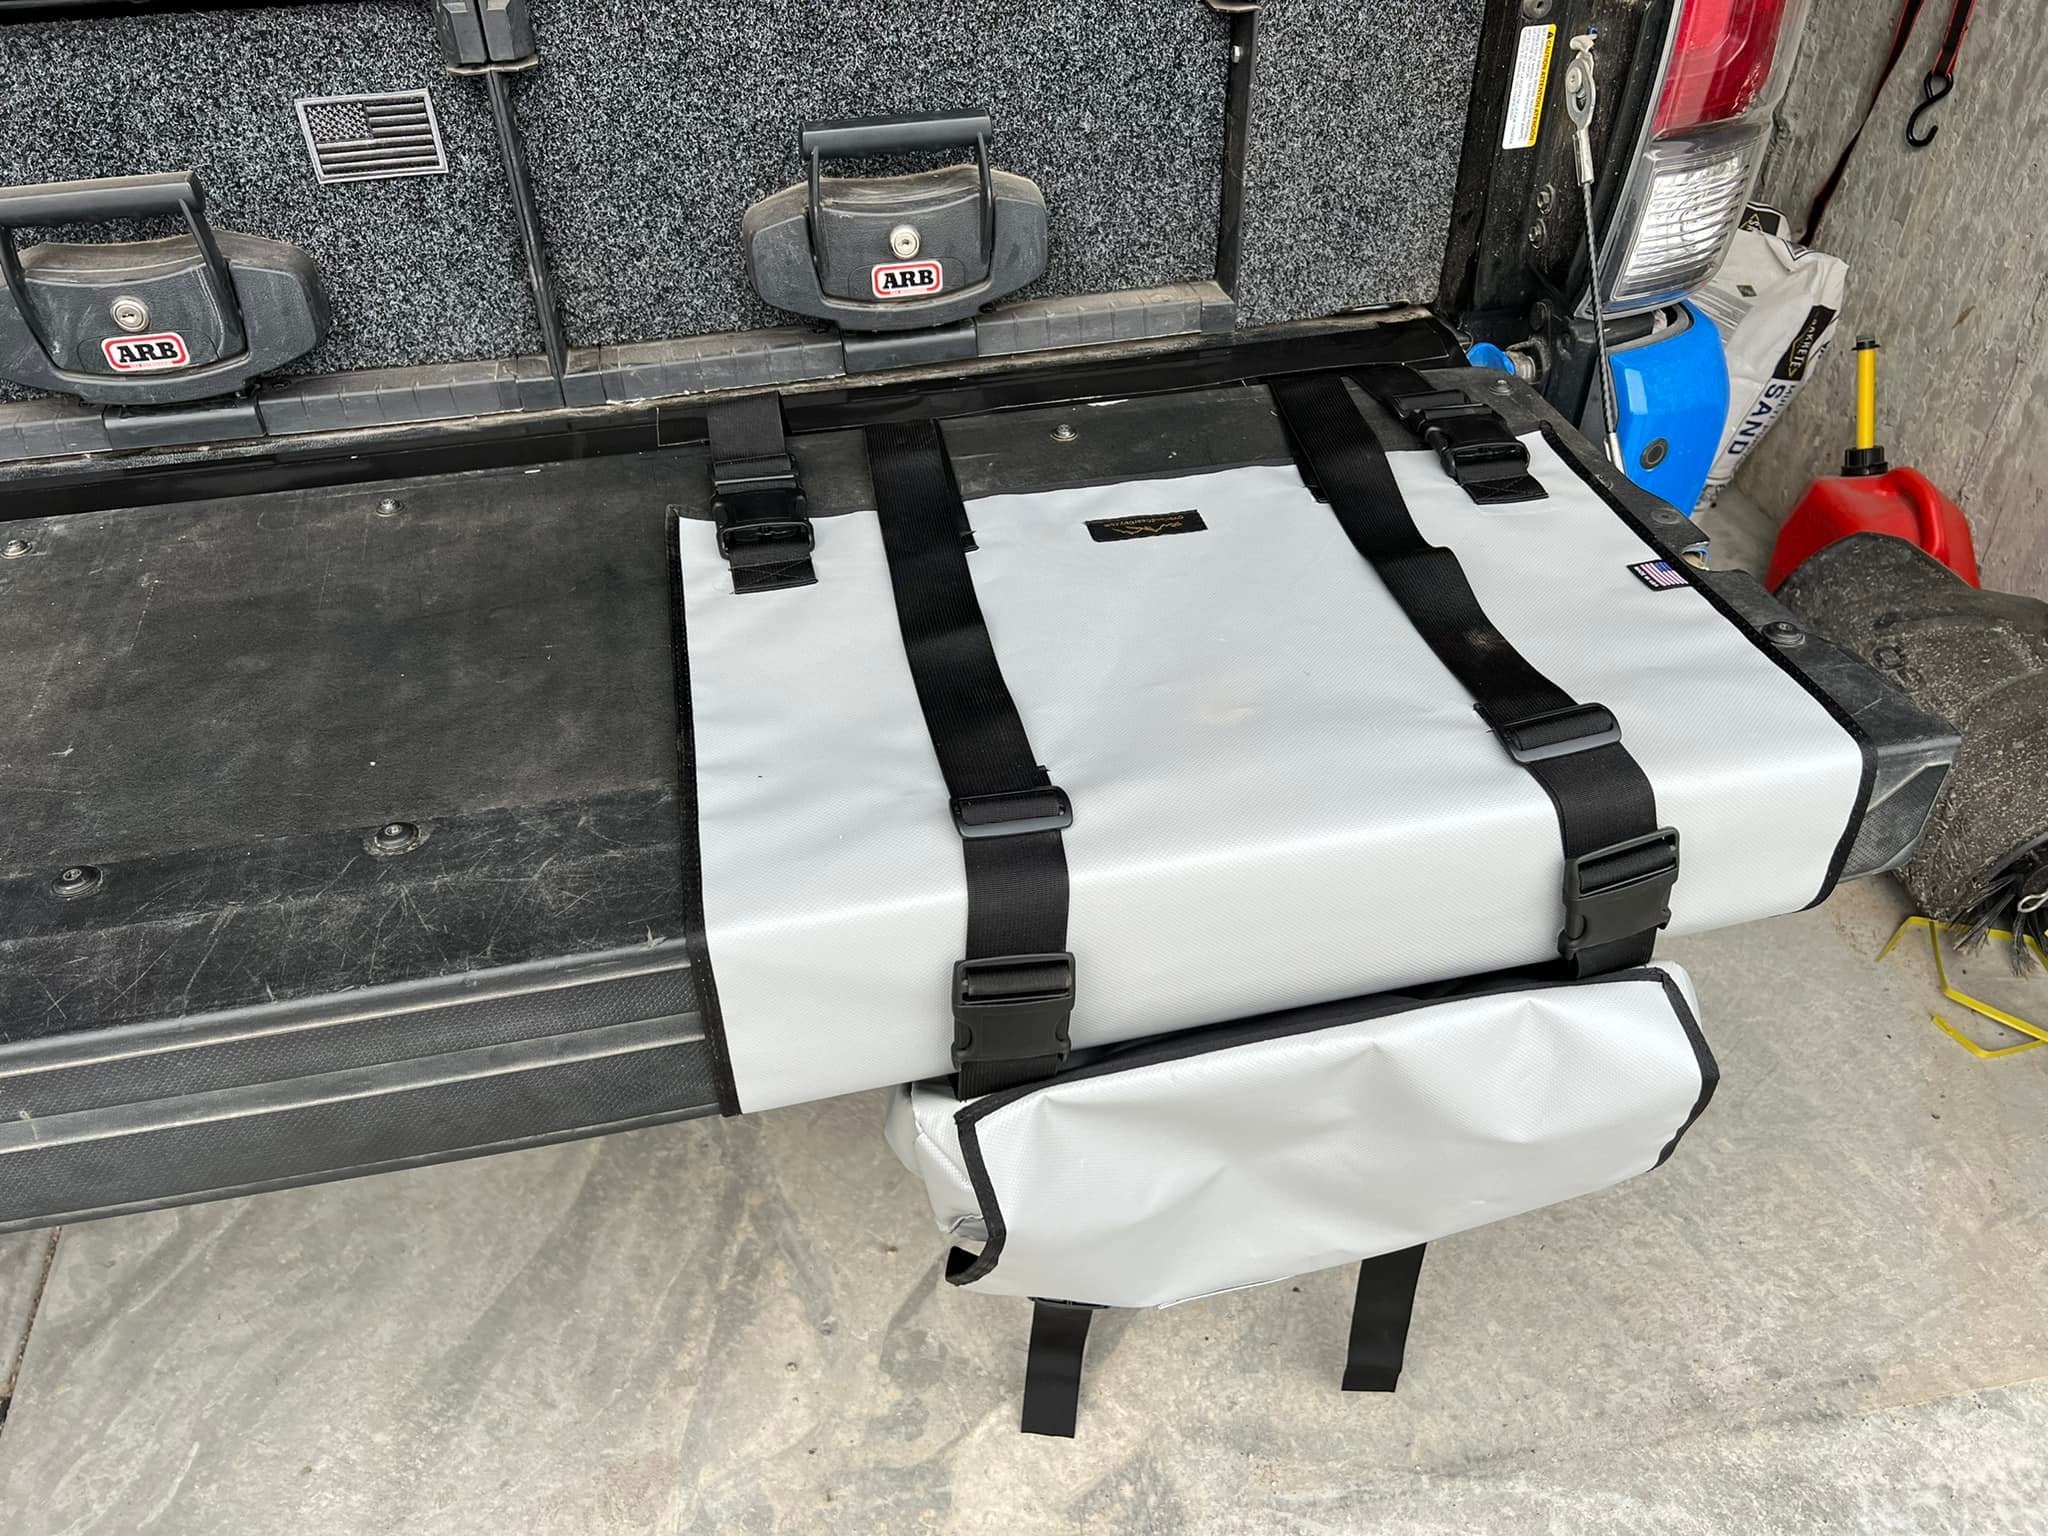 Truck Tailgate Trash / Storage Bag by Overland Gear Guy PRE-ORDER NOW